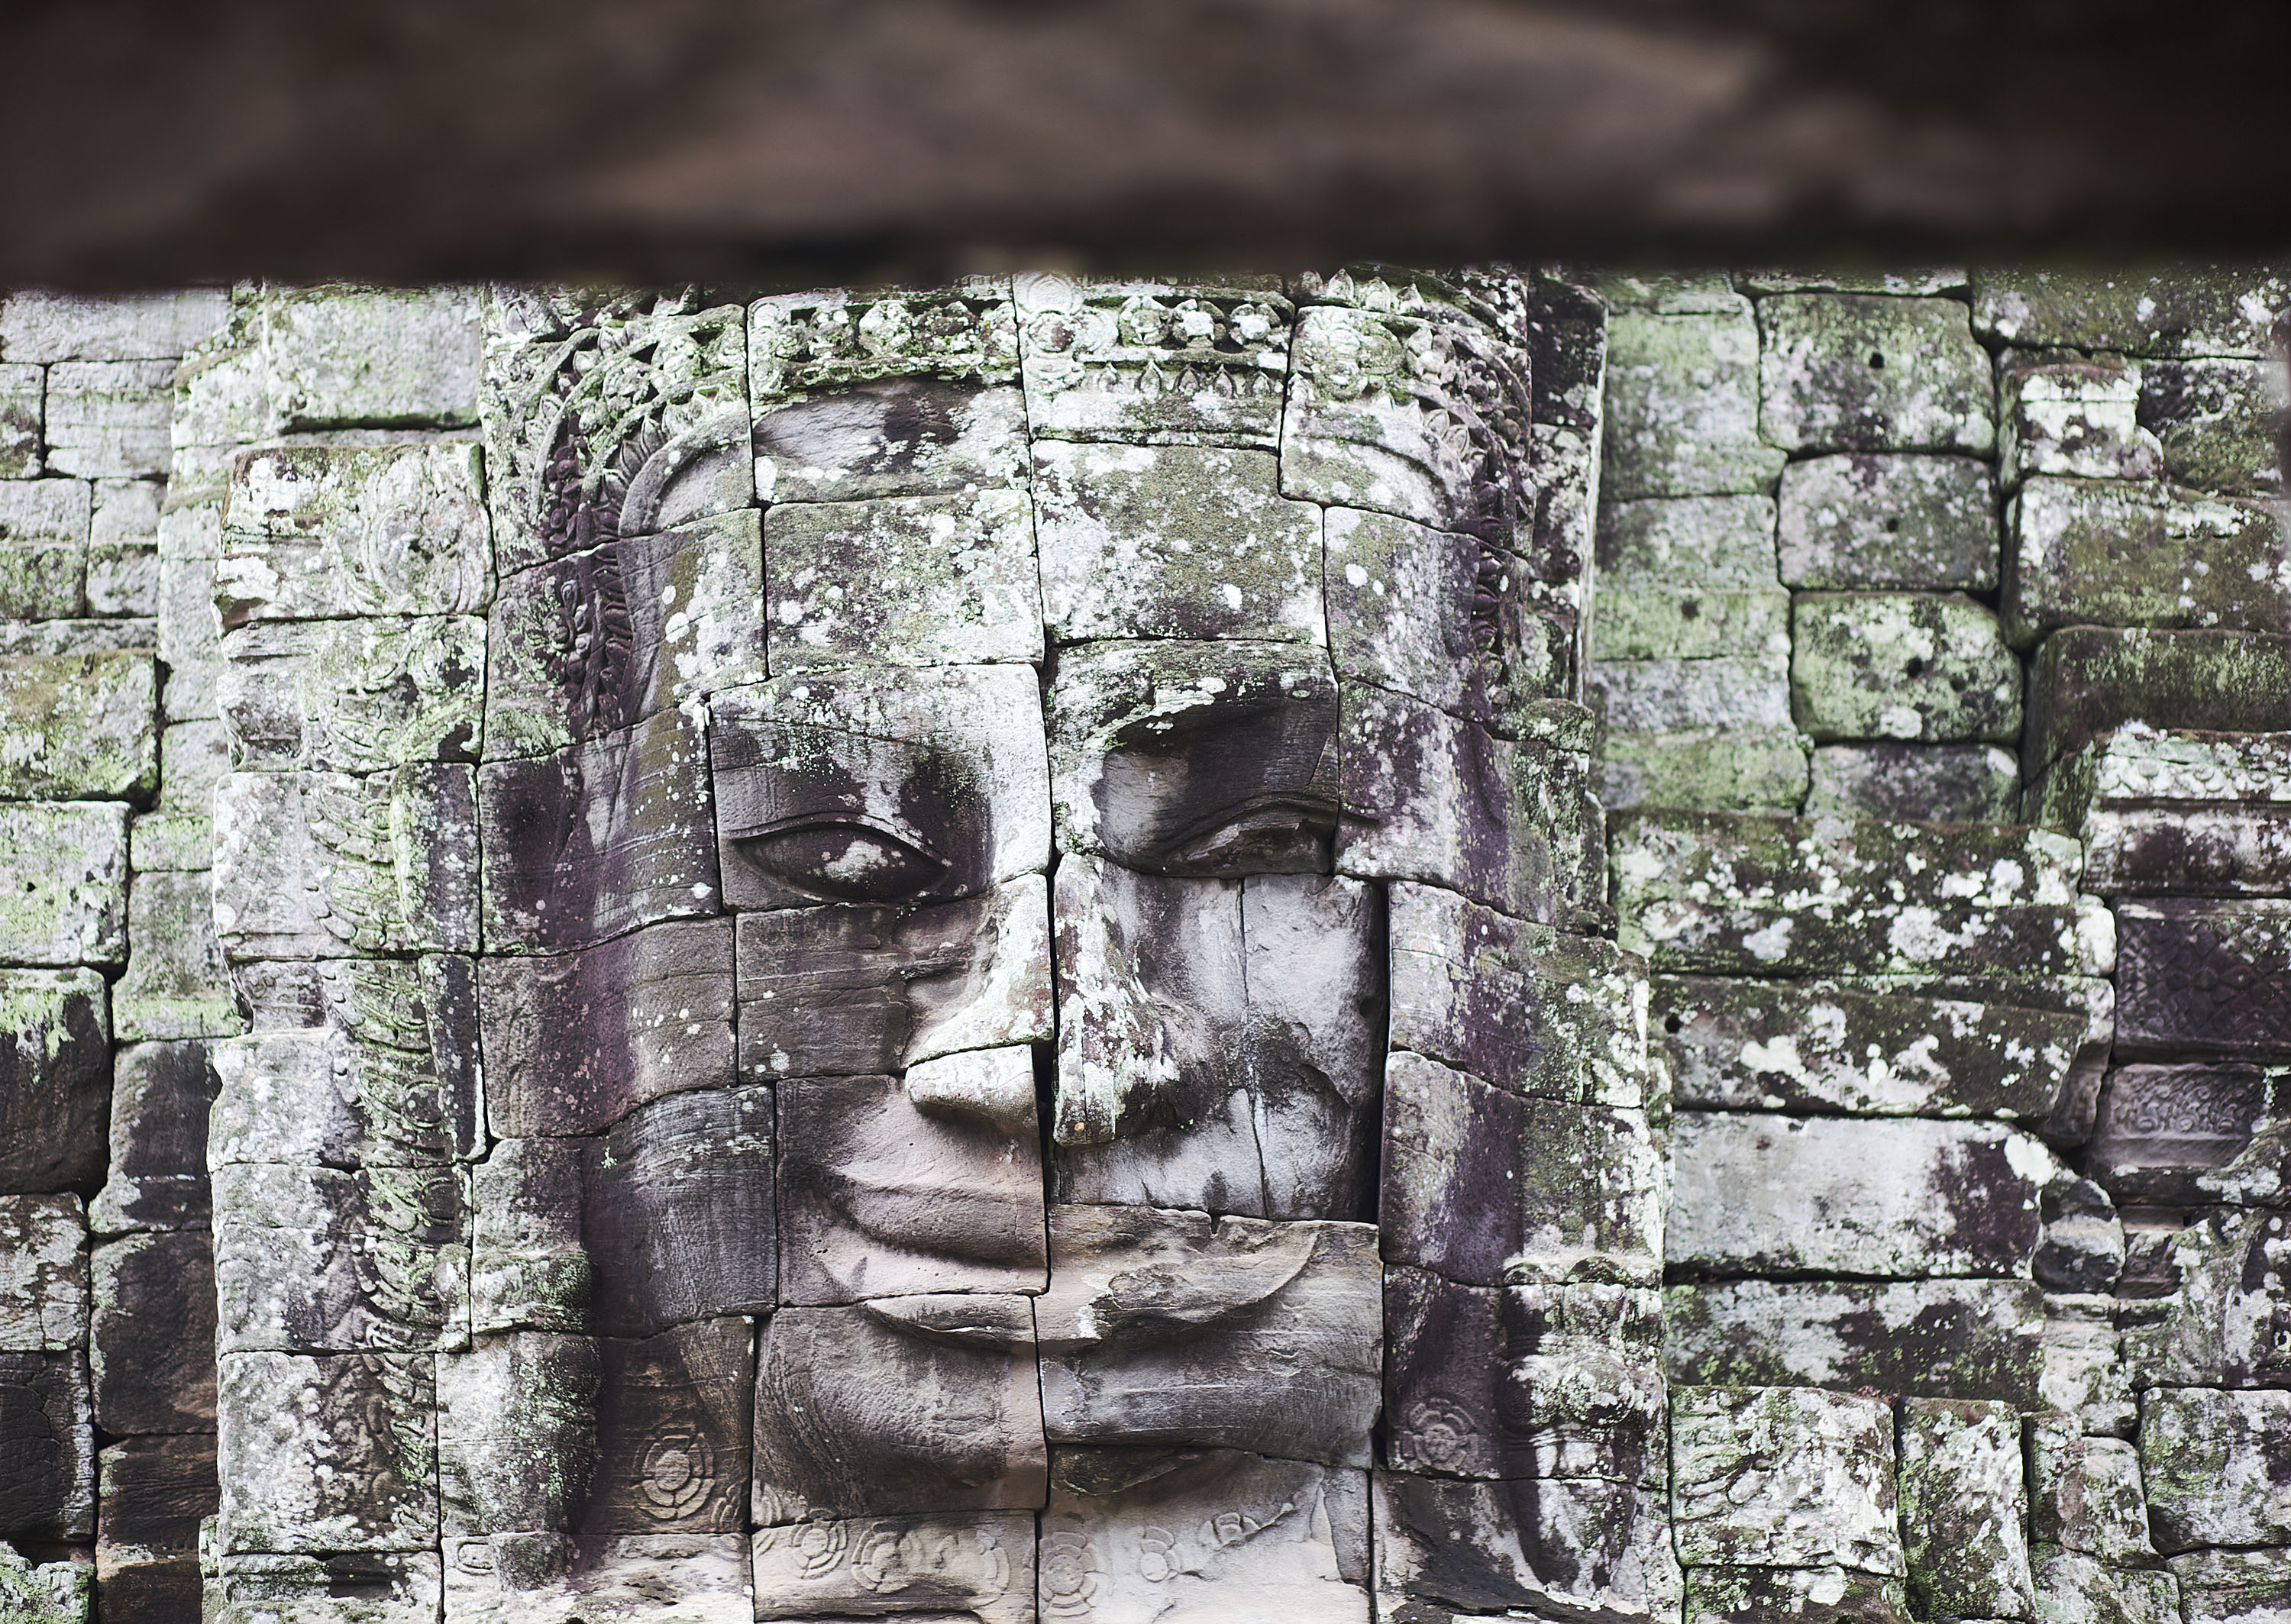 Postcards from Angkor Wat